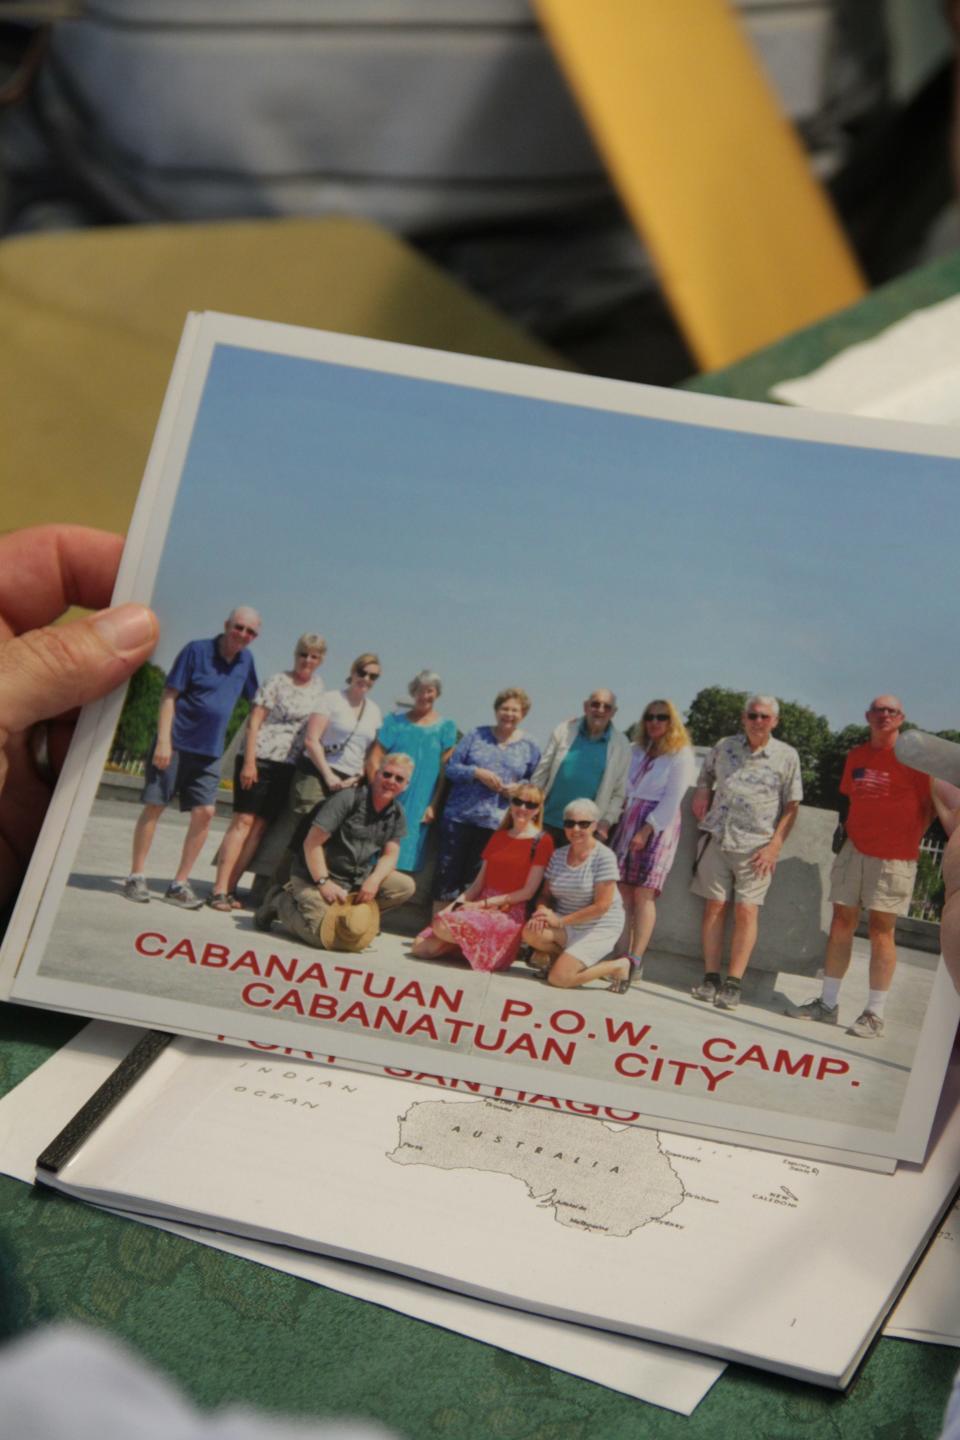 A 2015 file photo shows John McConnell holding a photo from a group trip to the site of the Cabanatuan POW camp in the Philippines.